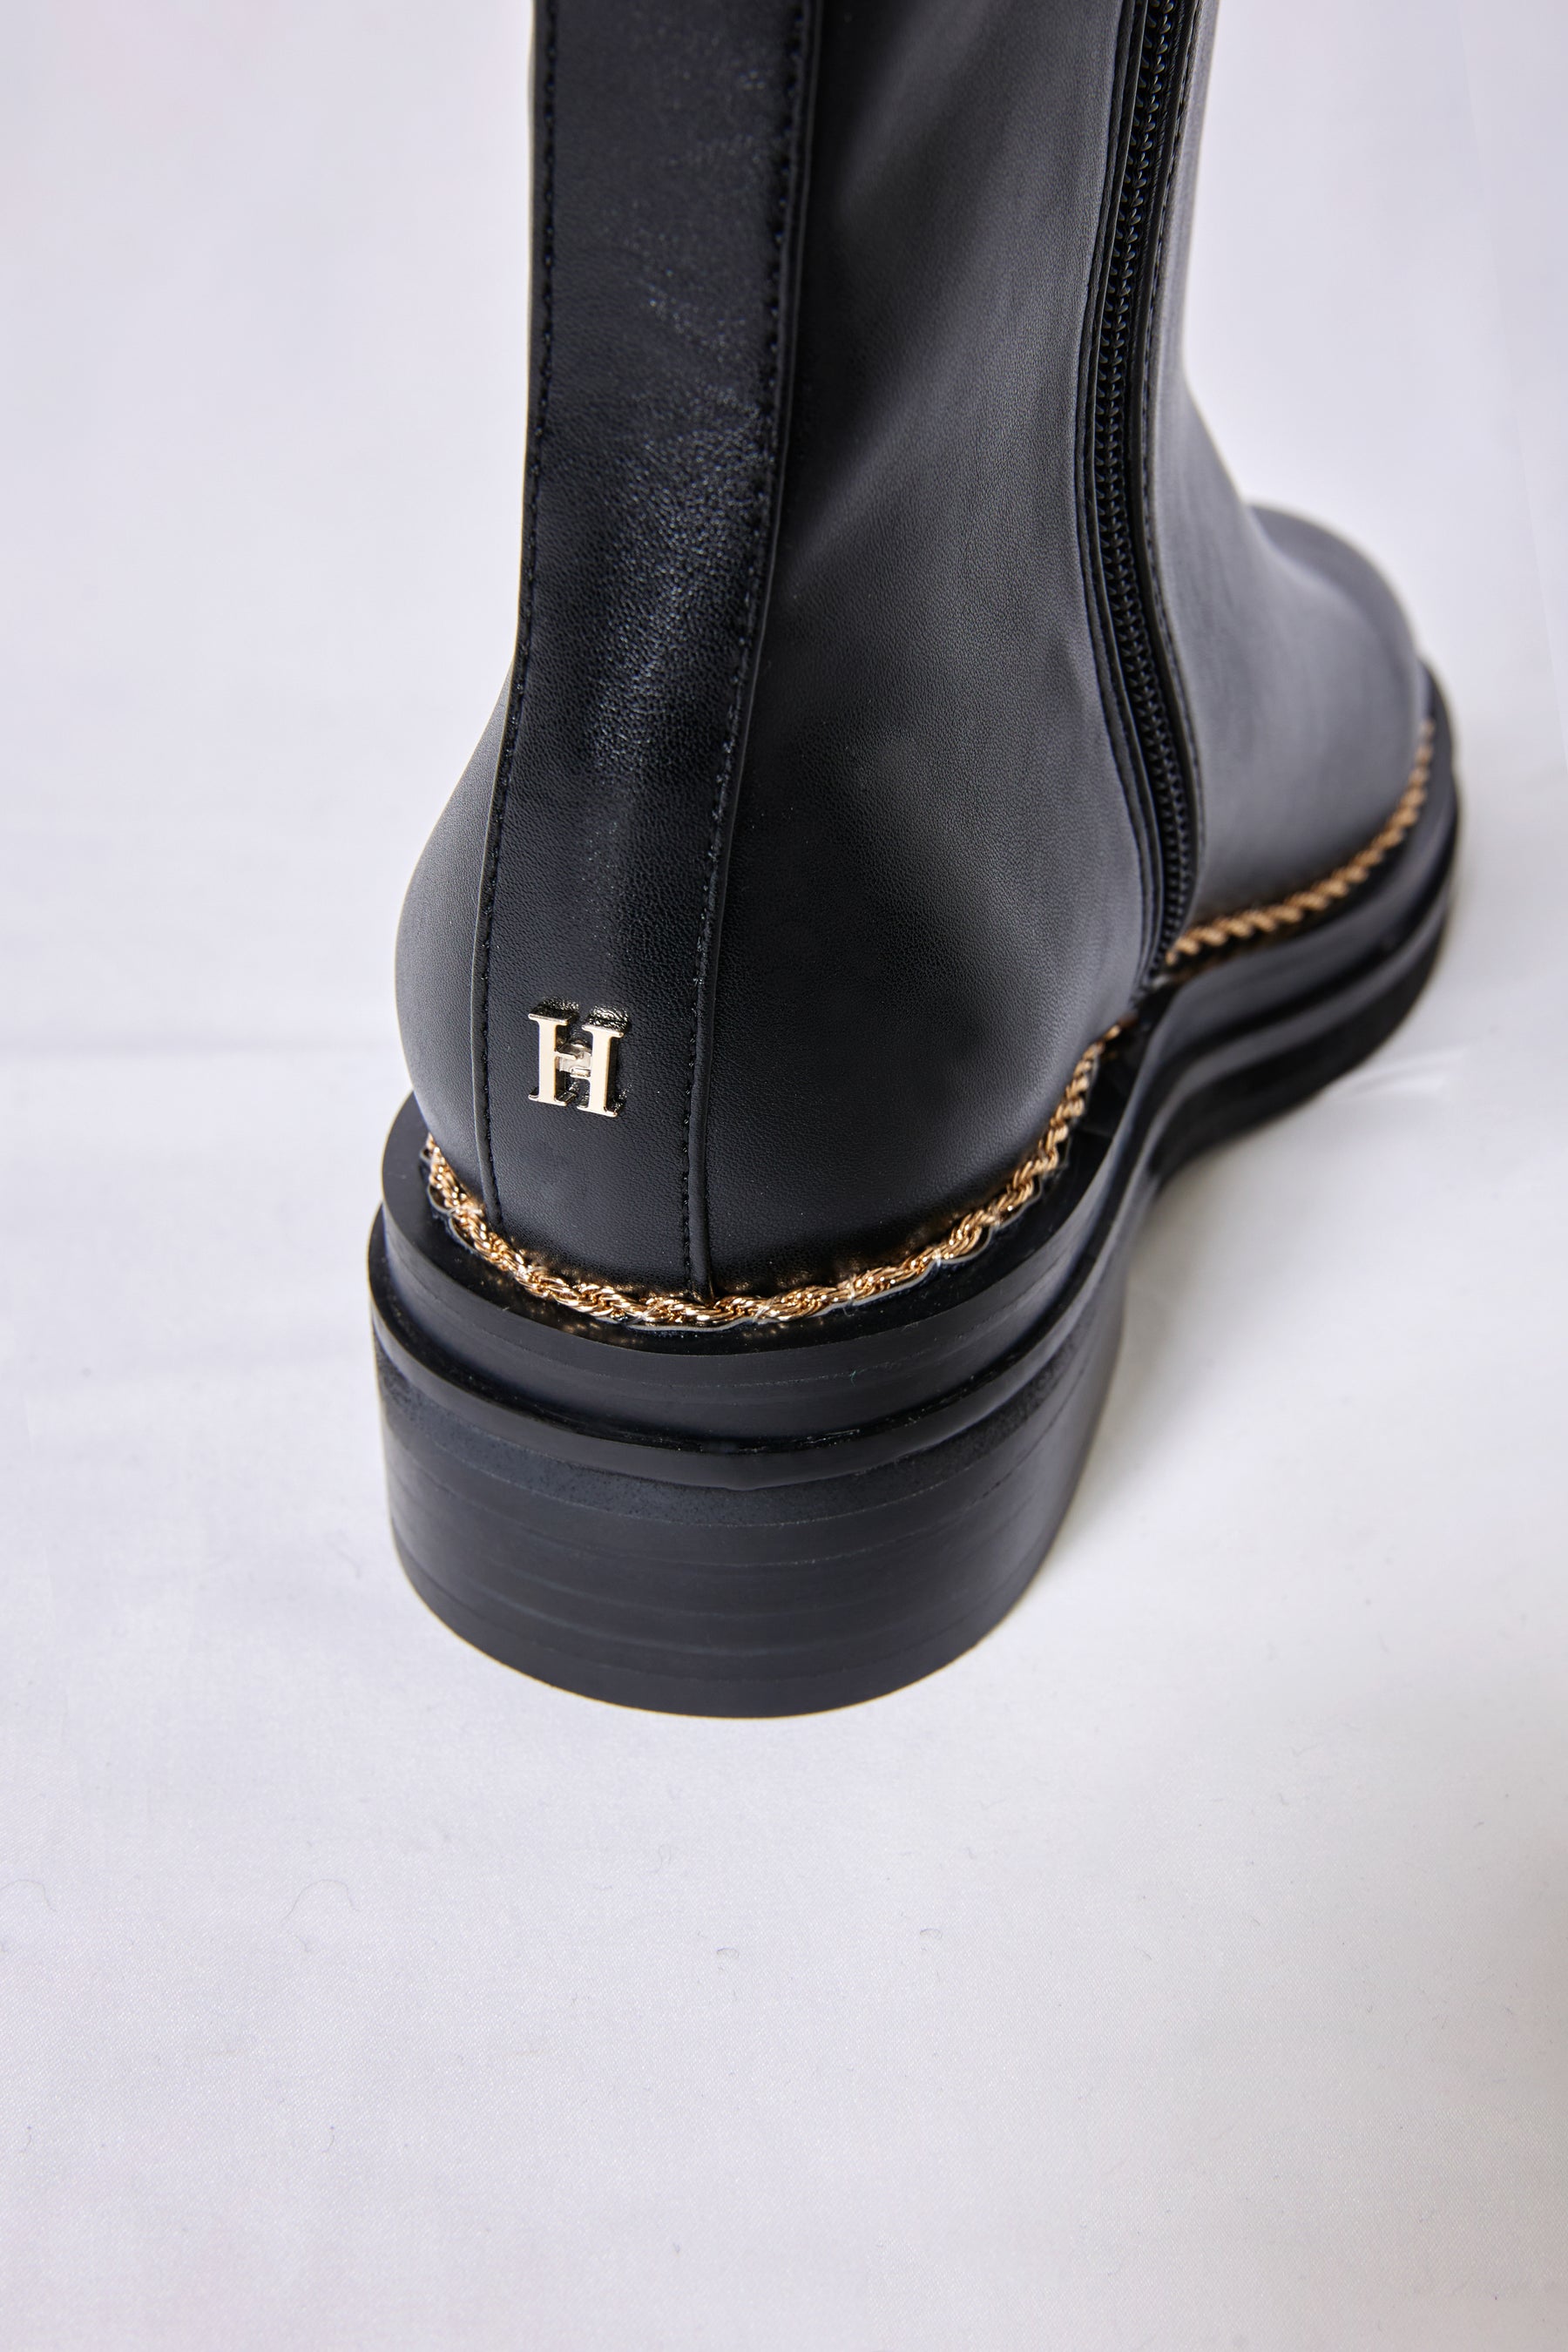 Chelsea Chain Ankle Boots